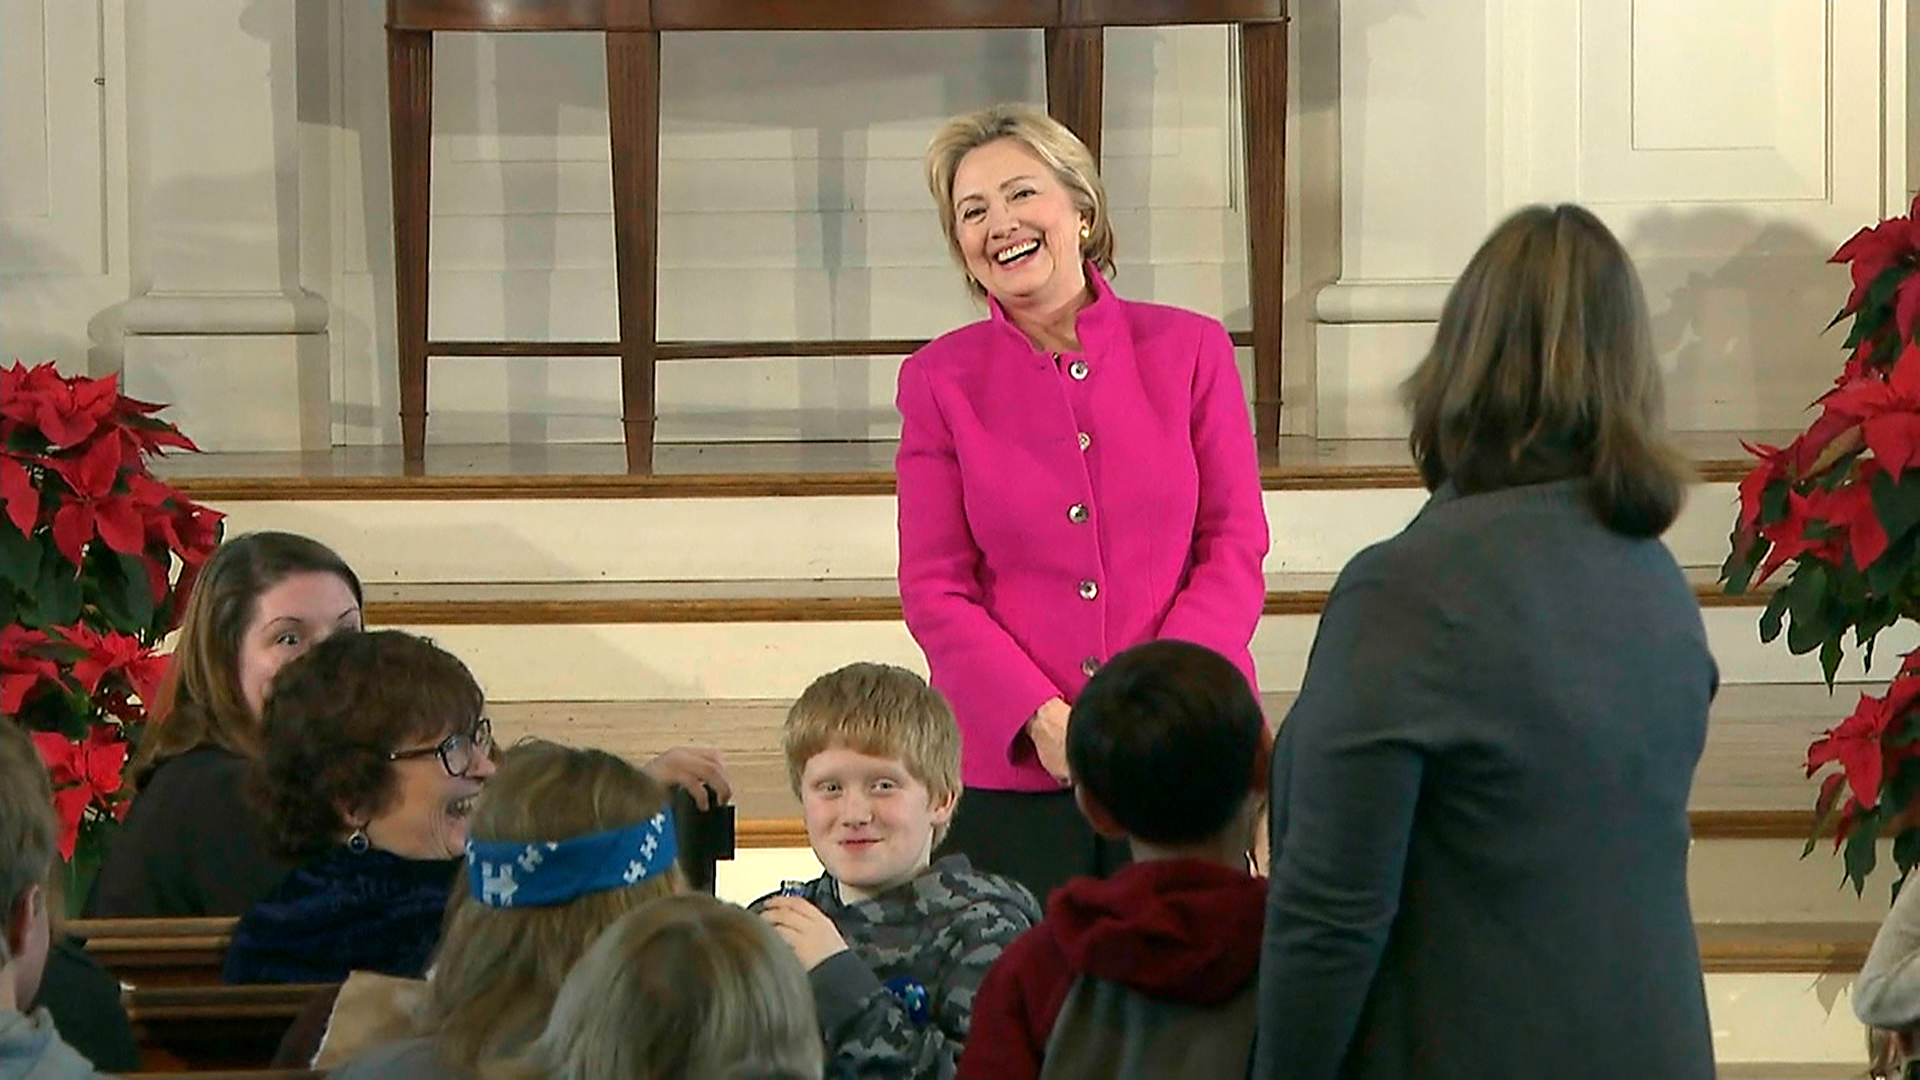 Kid Tells Clinton His Mom Should Be Making More Money Than His Dad